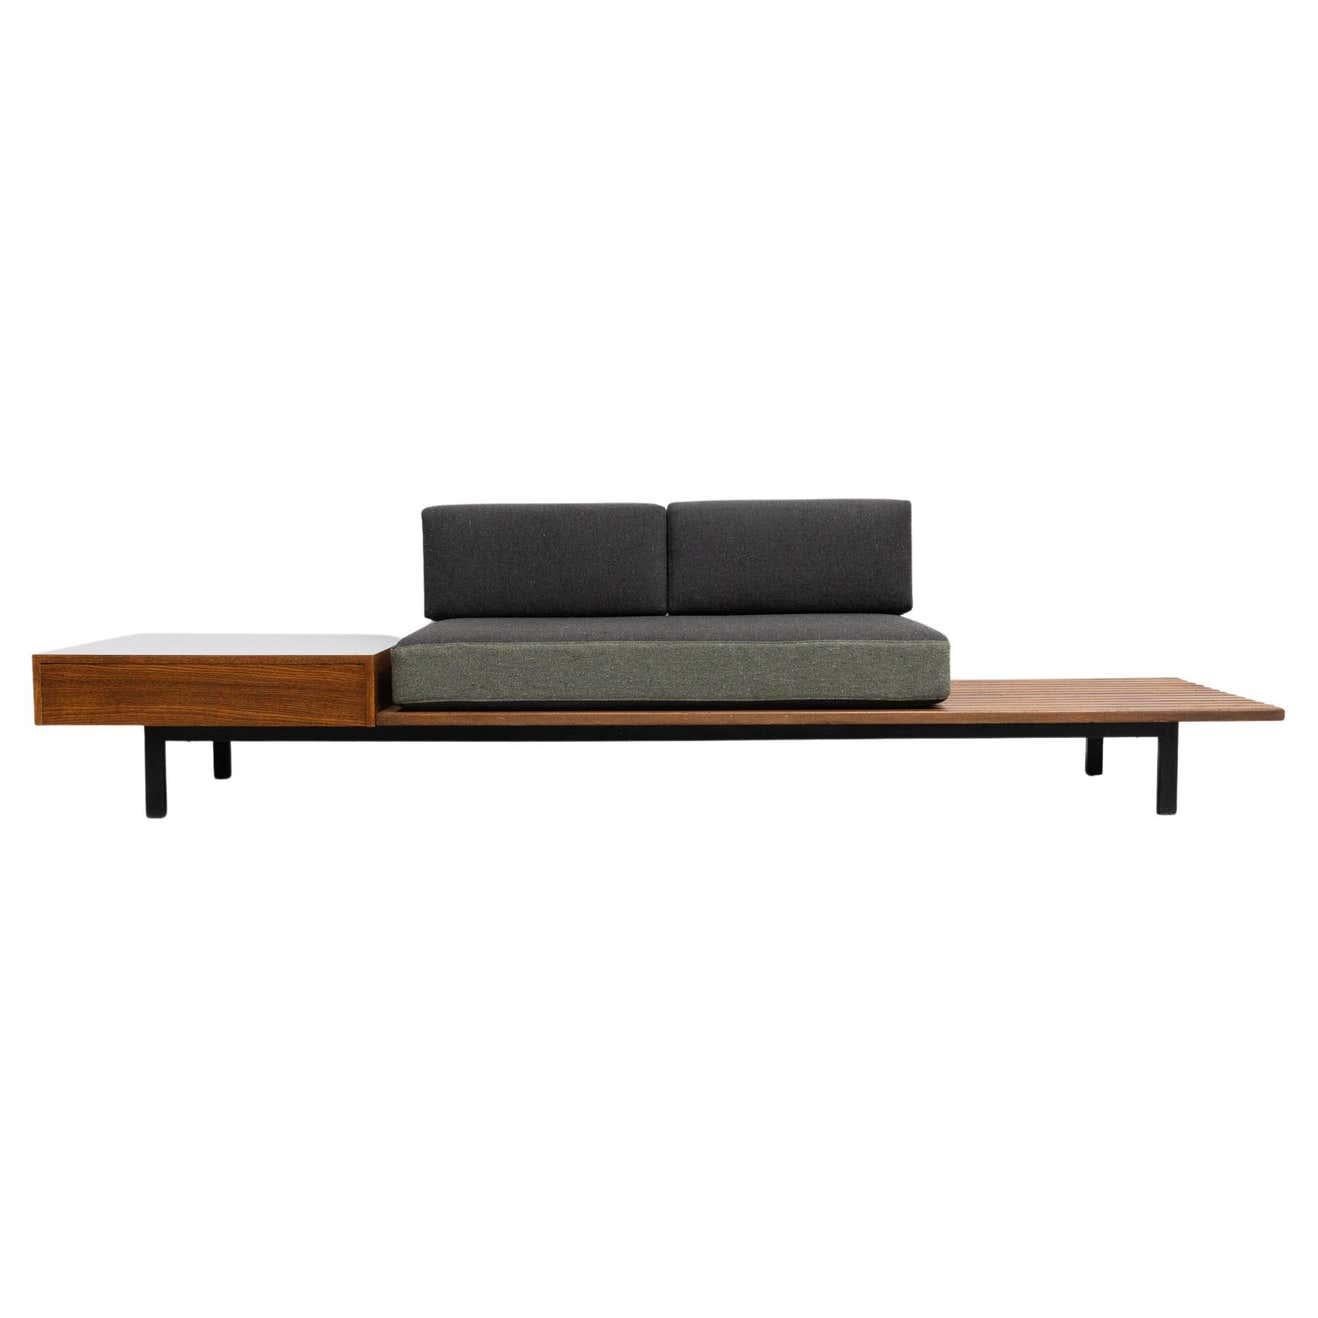 Charlotte Perriand Cansado Bench with a Drawer, circa 1958 For Sale 8